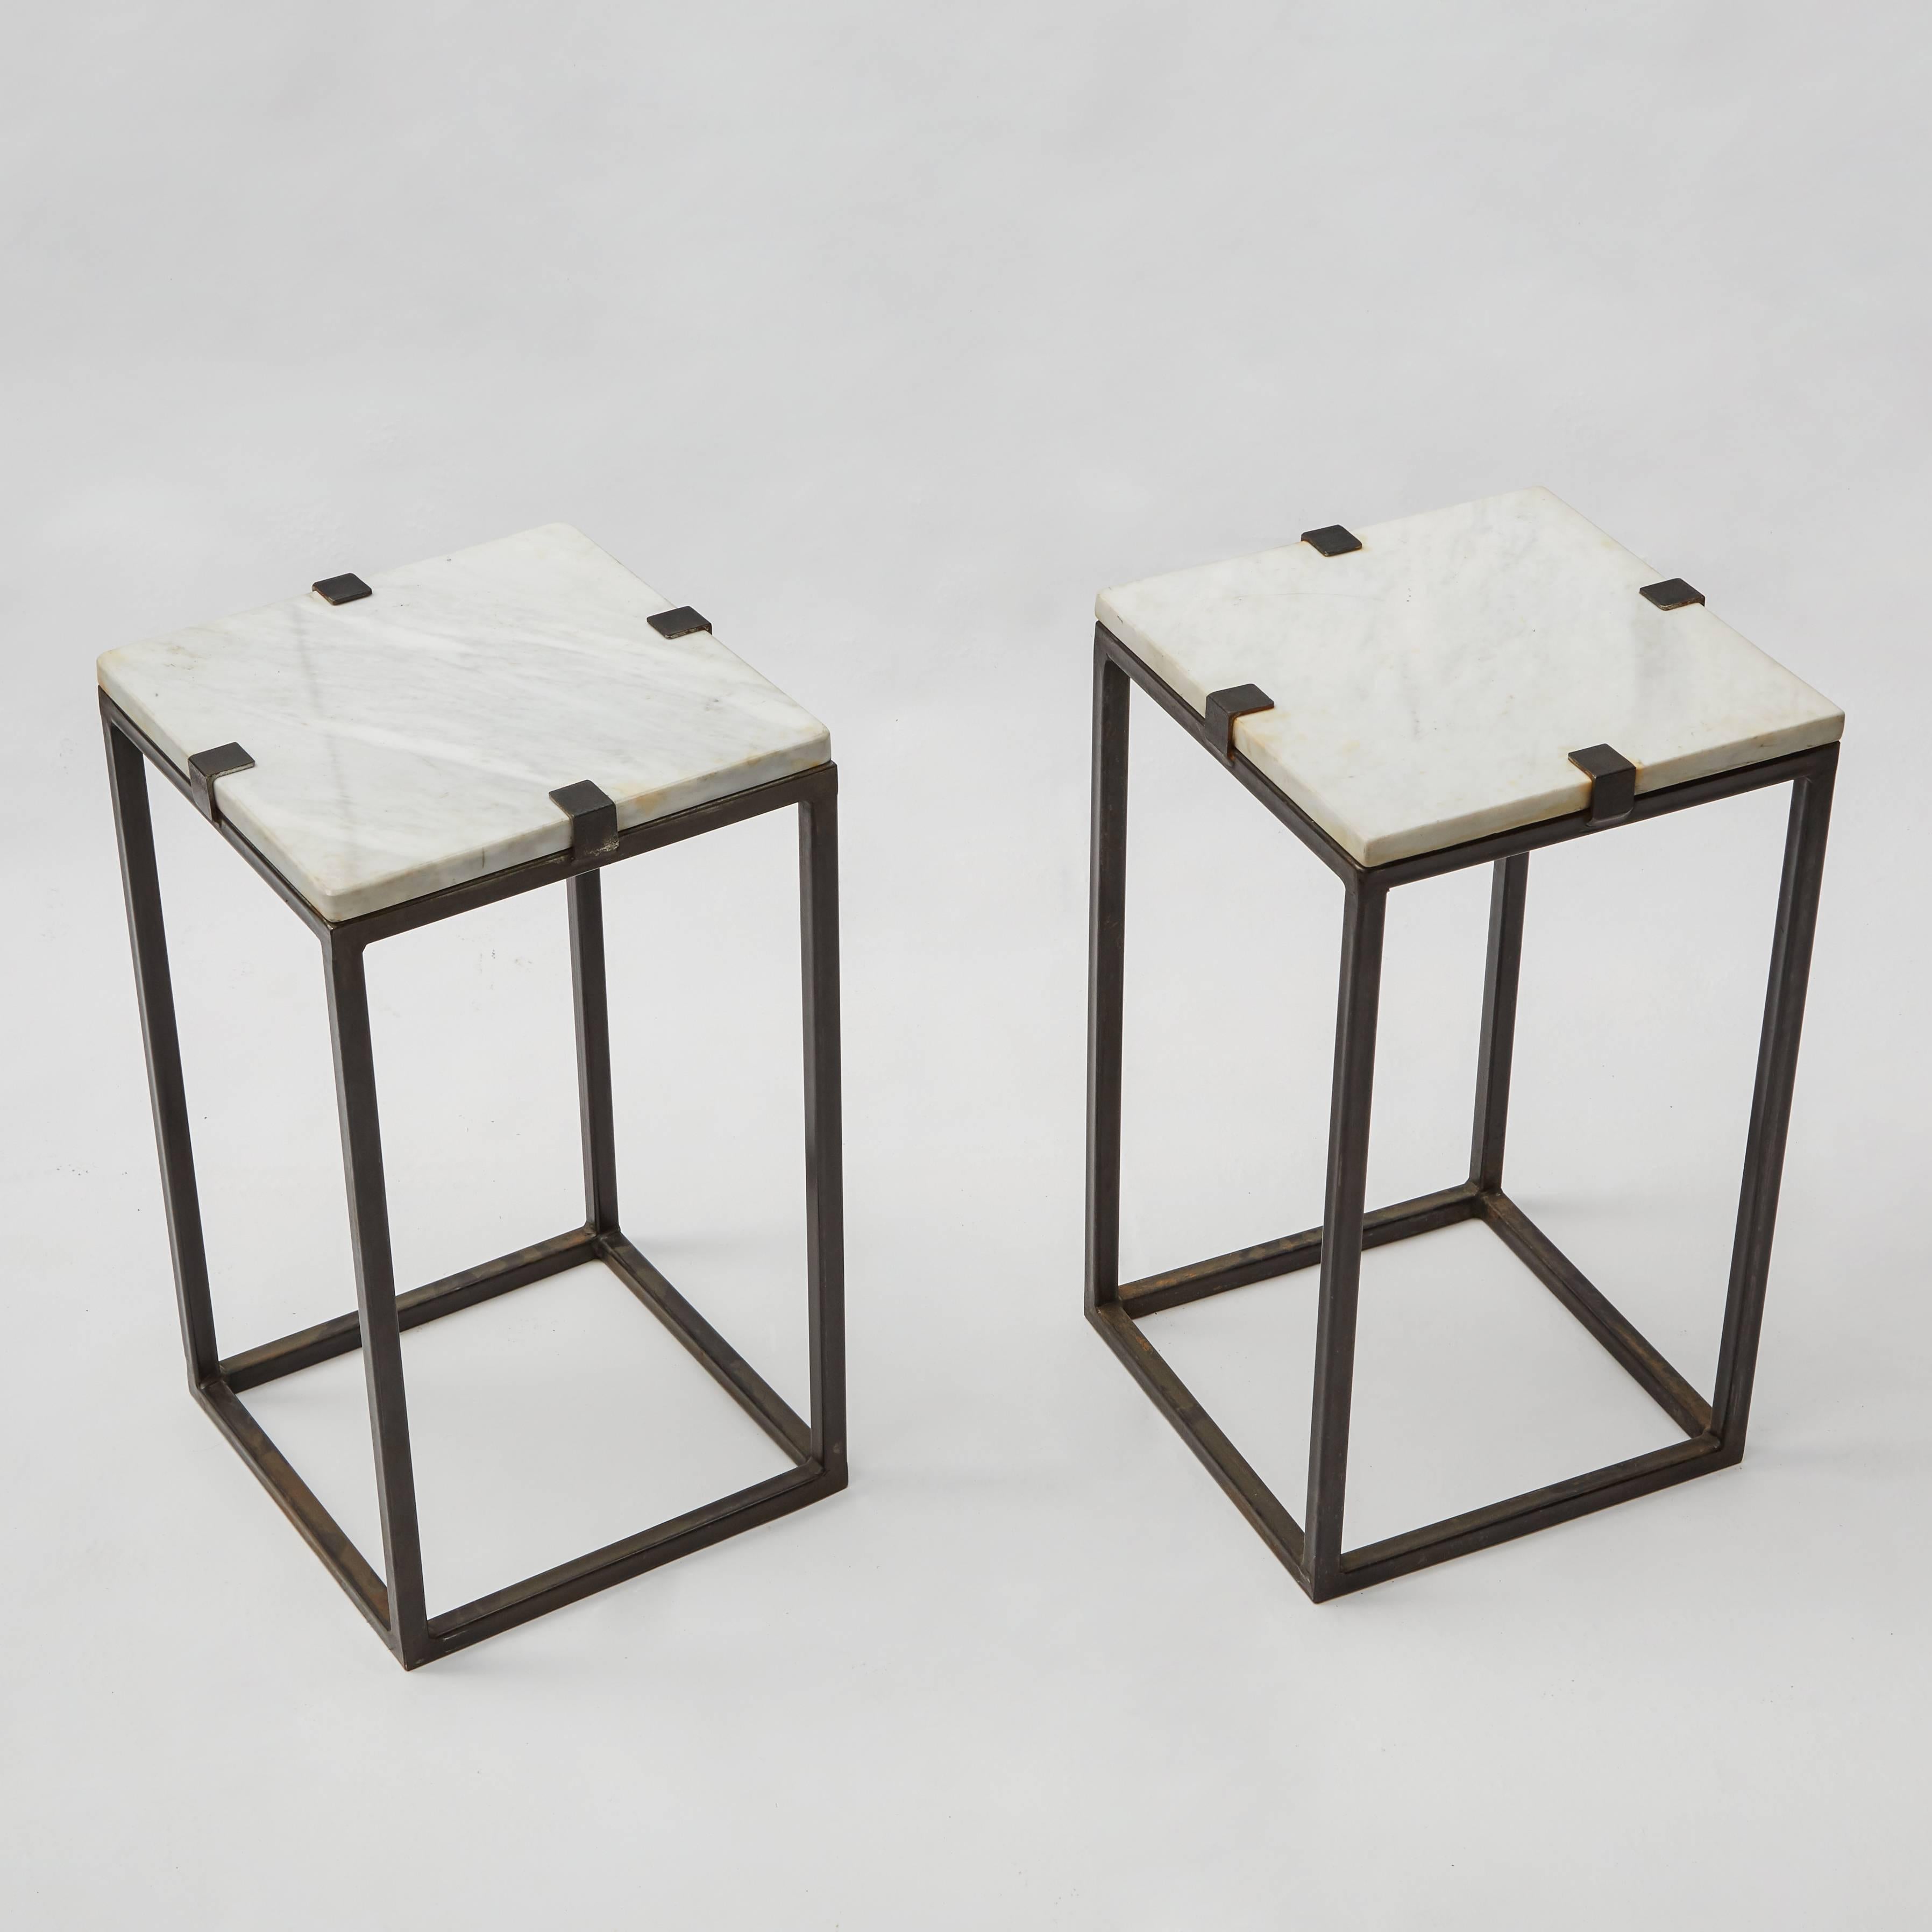 A pair of Industrial side table with simple modern metal base and marble tops.